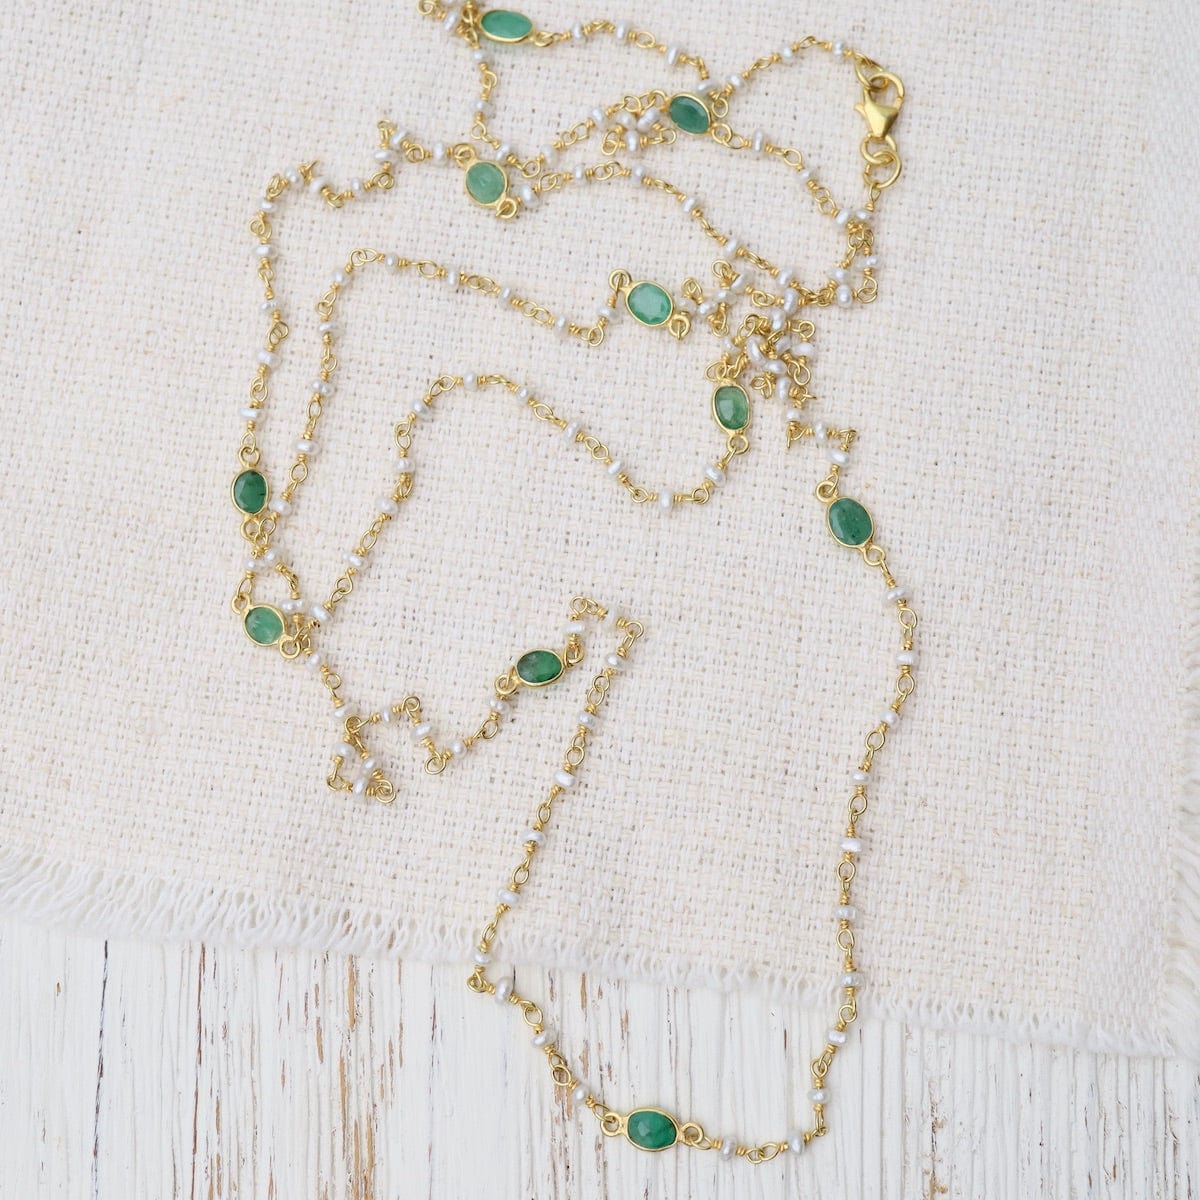 NKL-GPL Long Emerald & Pearl Necklace